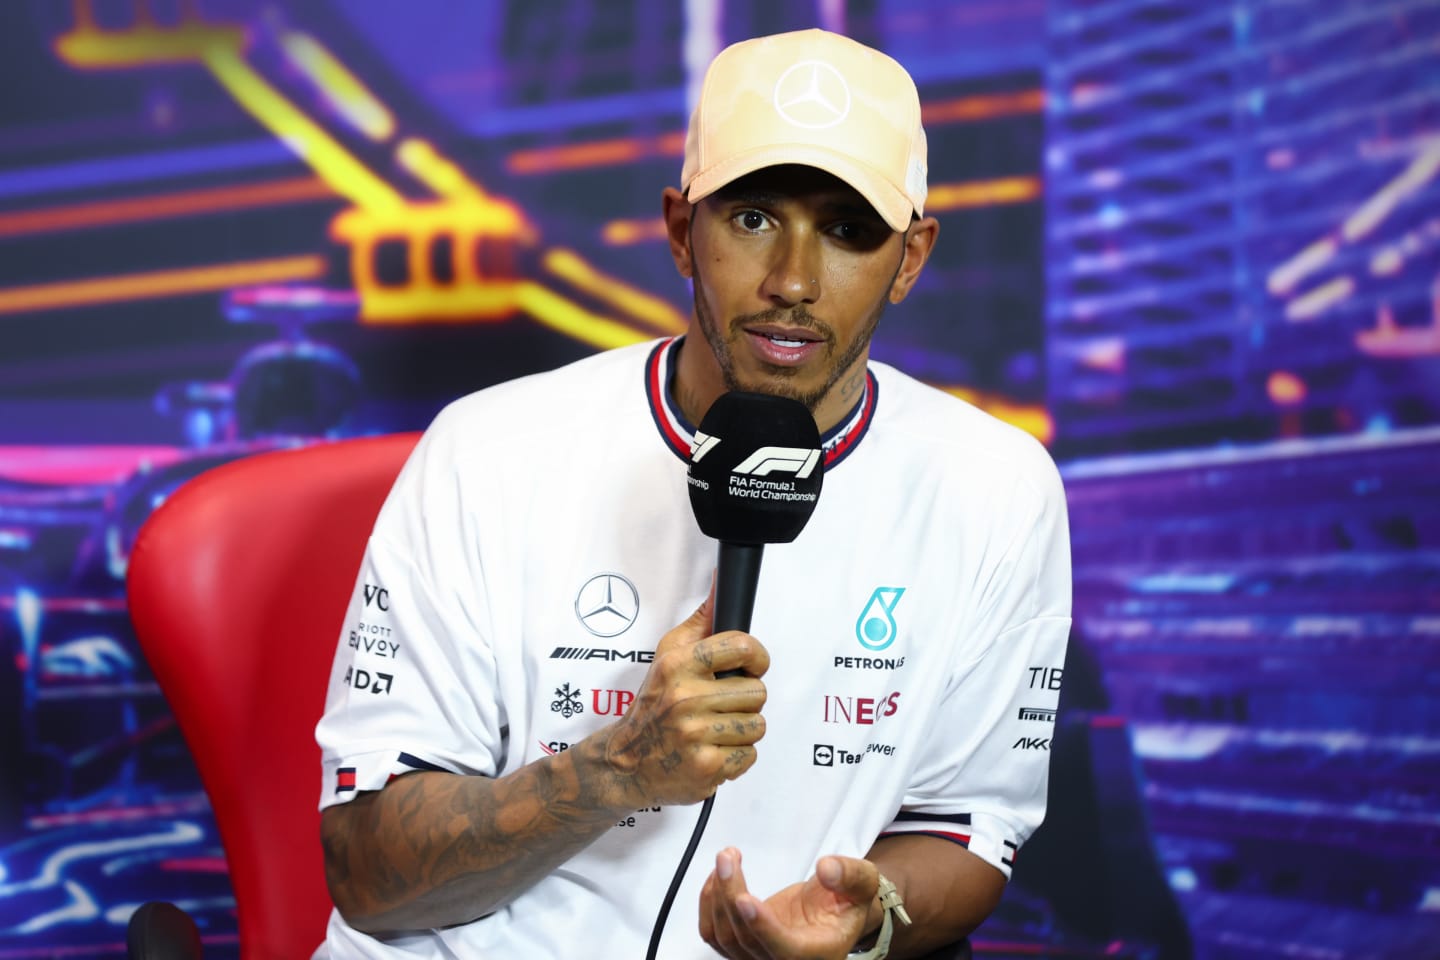 SINGAPORE, SINGAPORE - OCTOBER 01: Third placed qualifier Lewis Hamilton of Great Britain and Mercedes attends the press conference after qualifying ahead of the F1 Grand Prix of Singapore at Marina Bay Street Circuit on October 01, 2022 in Singapore, Singapore. (Photo by Dan Istitene/Getty Images)